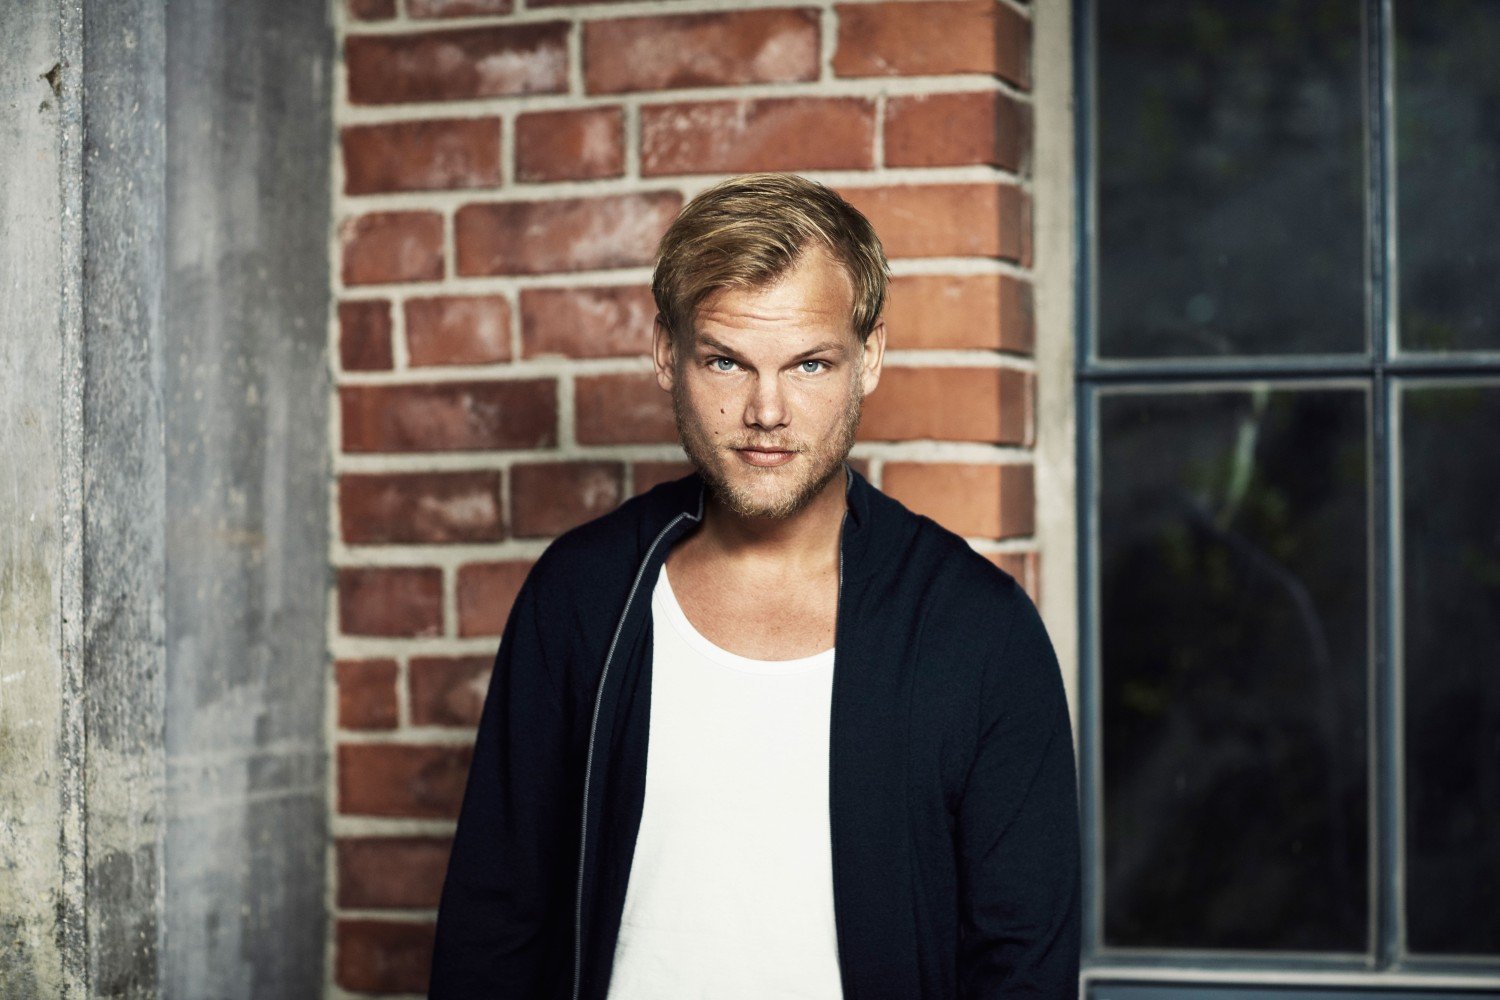 New Avicii Song With Kygo & Sandro Cavazza Due For Official Release This Week [LISTEN]